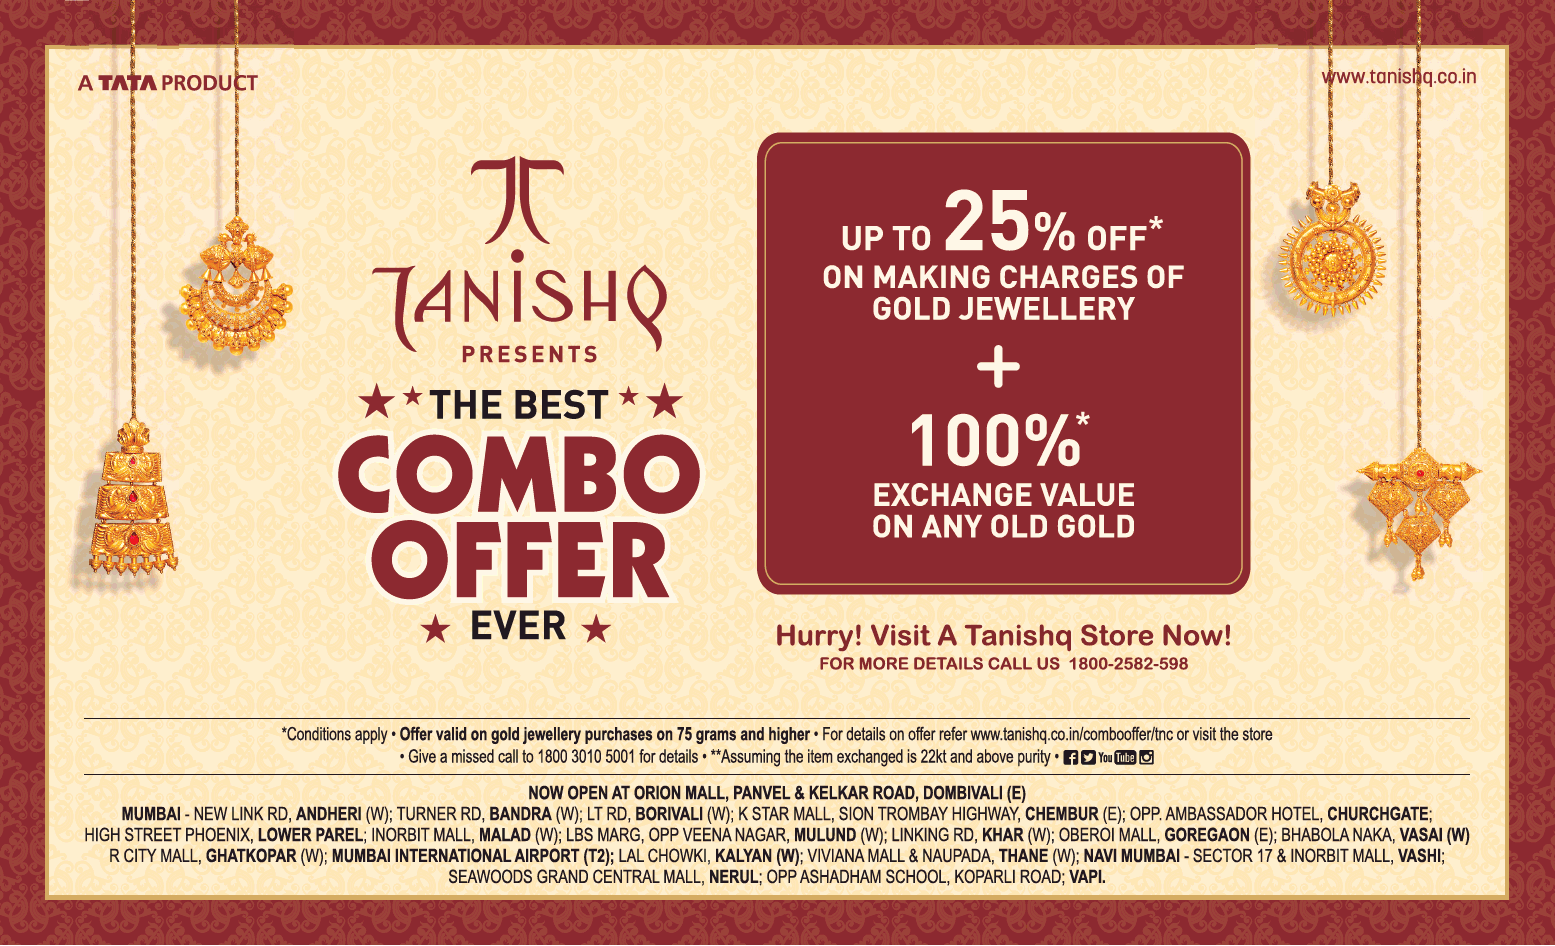 tanishq-presents-the-best-combo-offer-ever-ad-times-of-india-mumbai-17-11-2018.png